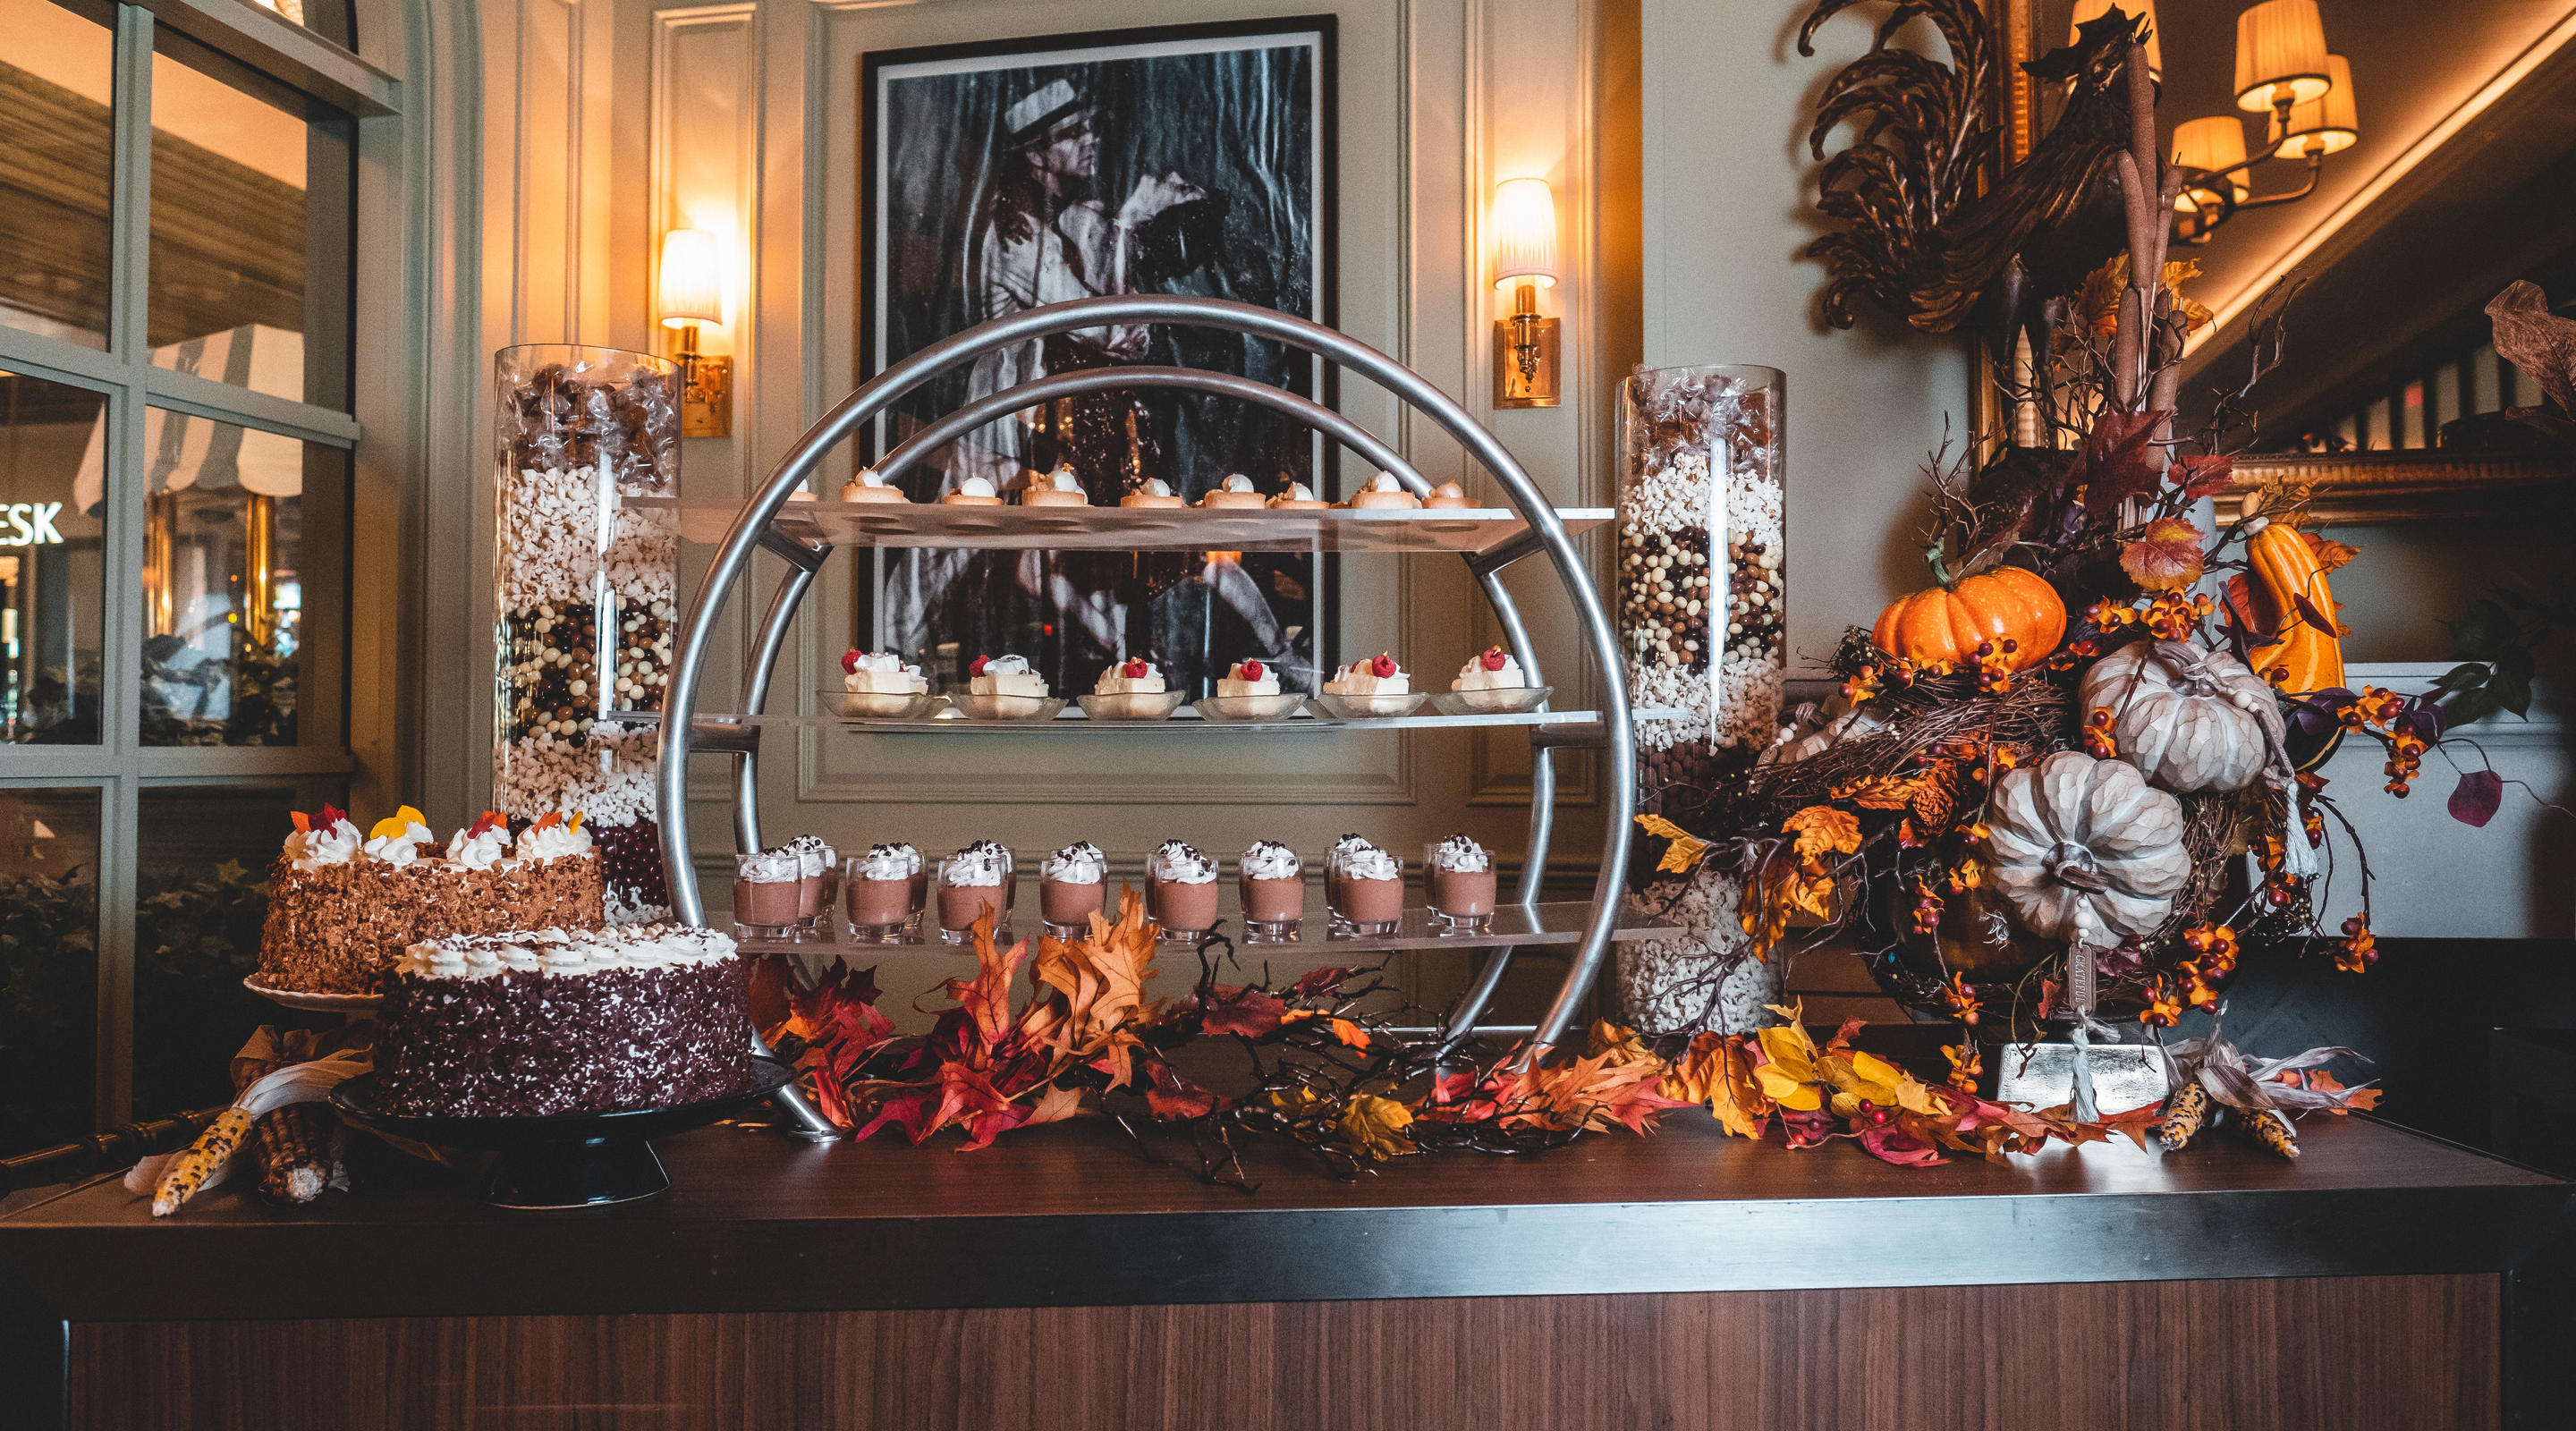 A dessert station with Thanksgiving-themed treats.